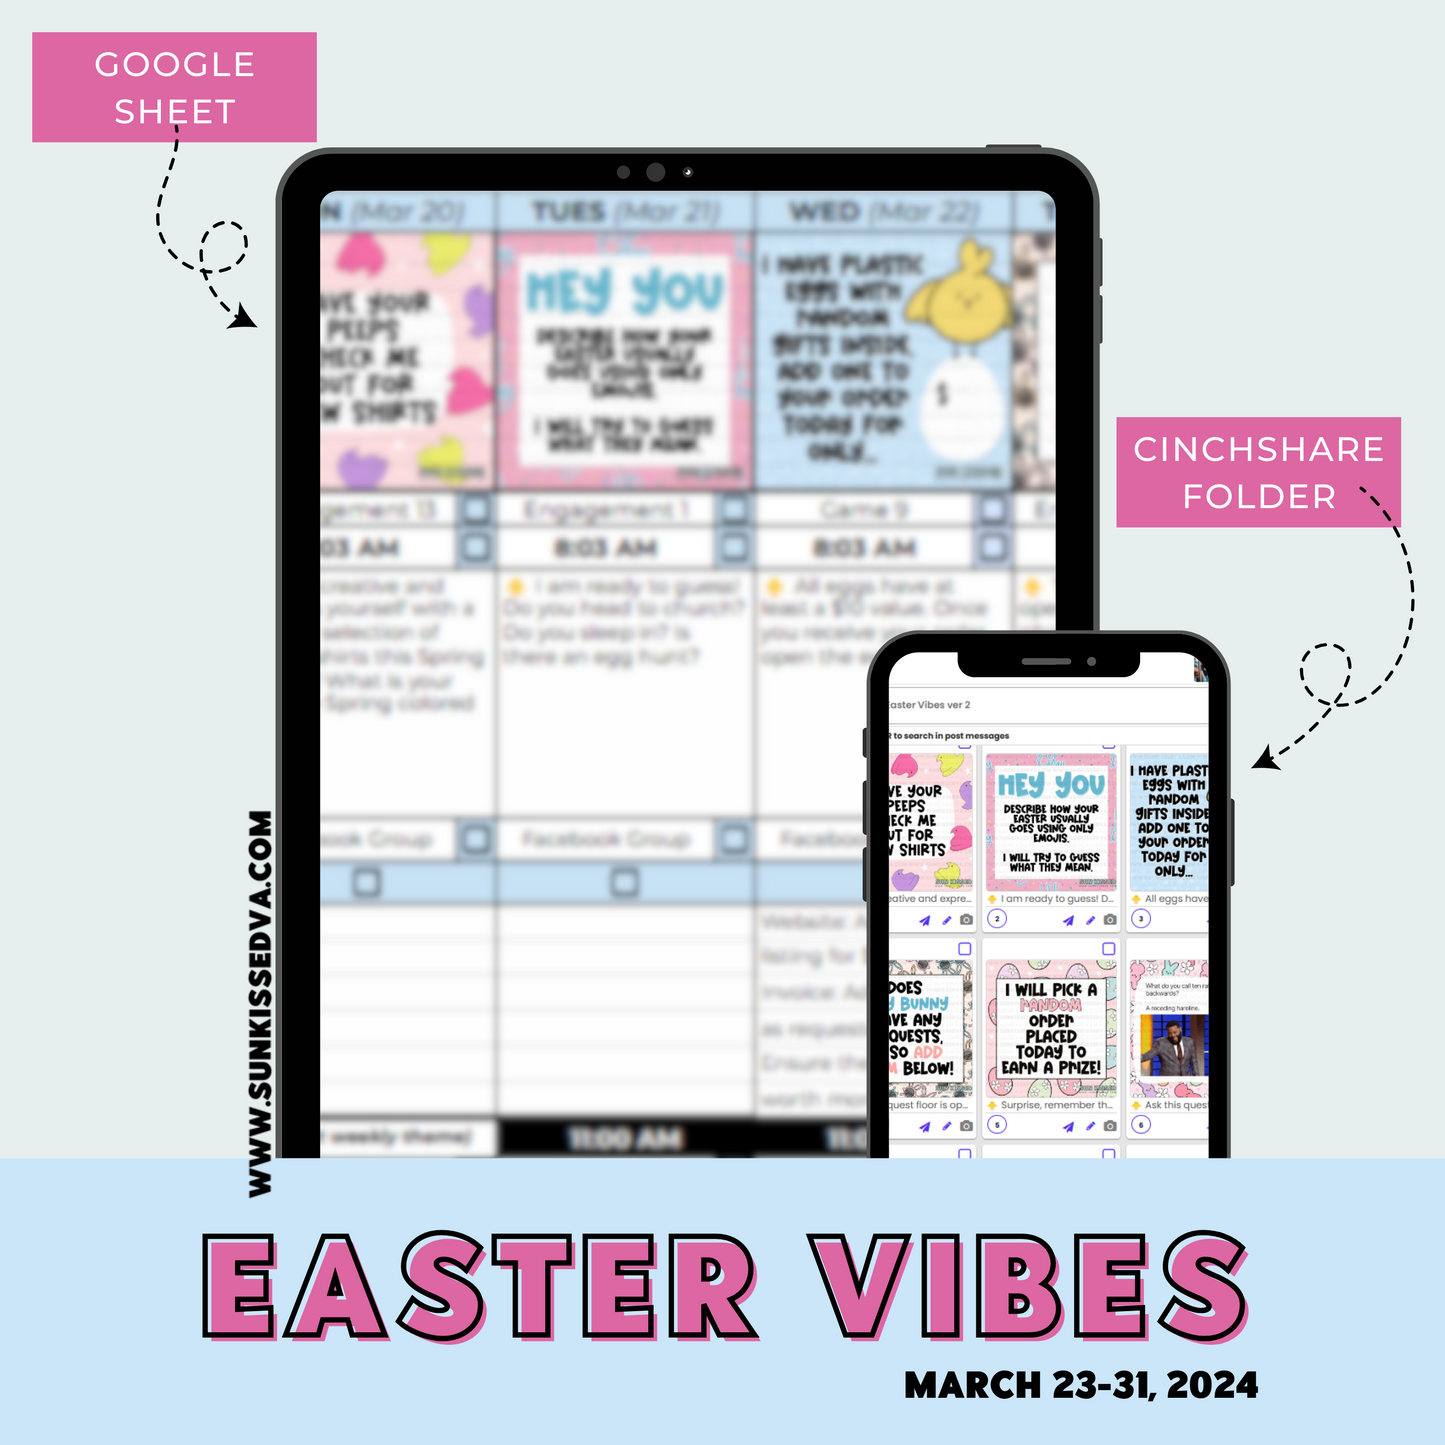 Easter Vibes Content Calendar is just what needs to feel hoppy | Sun Kissed Virtual Assistant